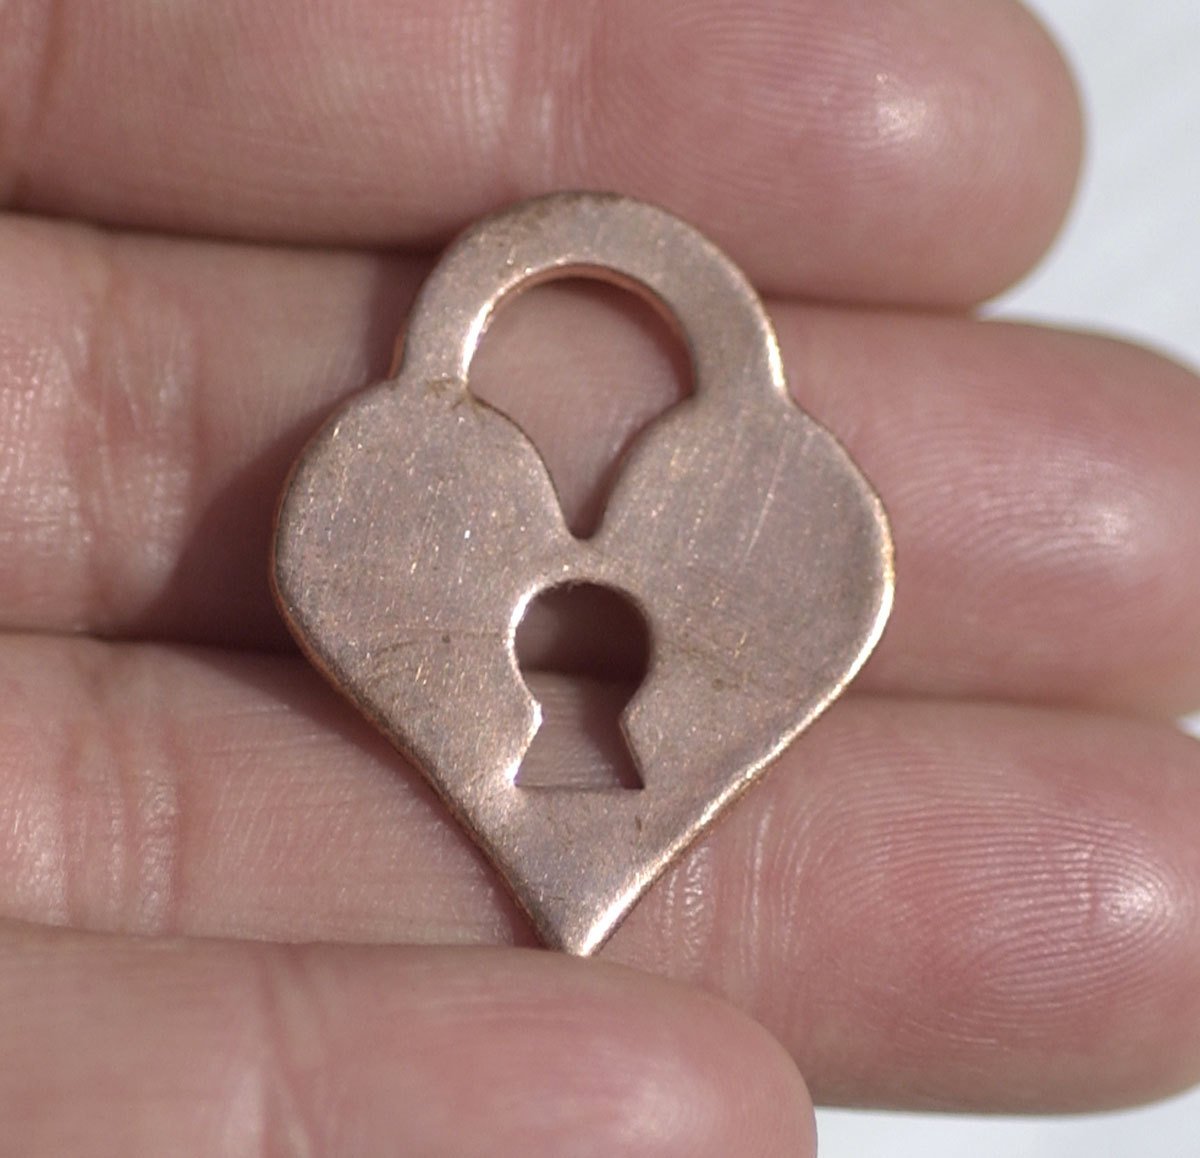 Perfect Heart Padlock 28mm x 22mm Metal Blanks Shape Form for Metalworking Soldering Blank - 4 pieces